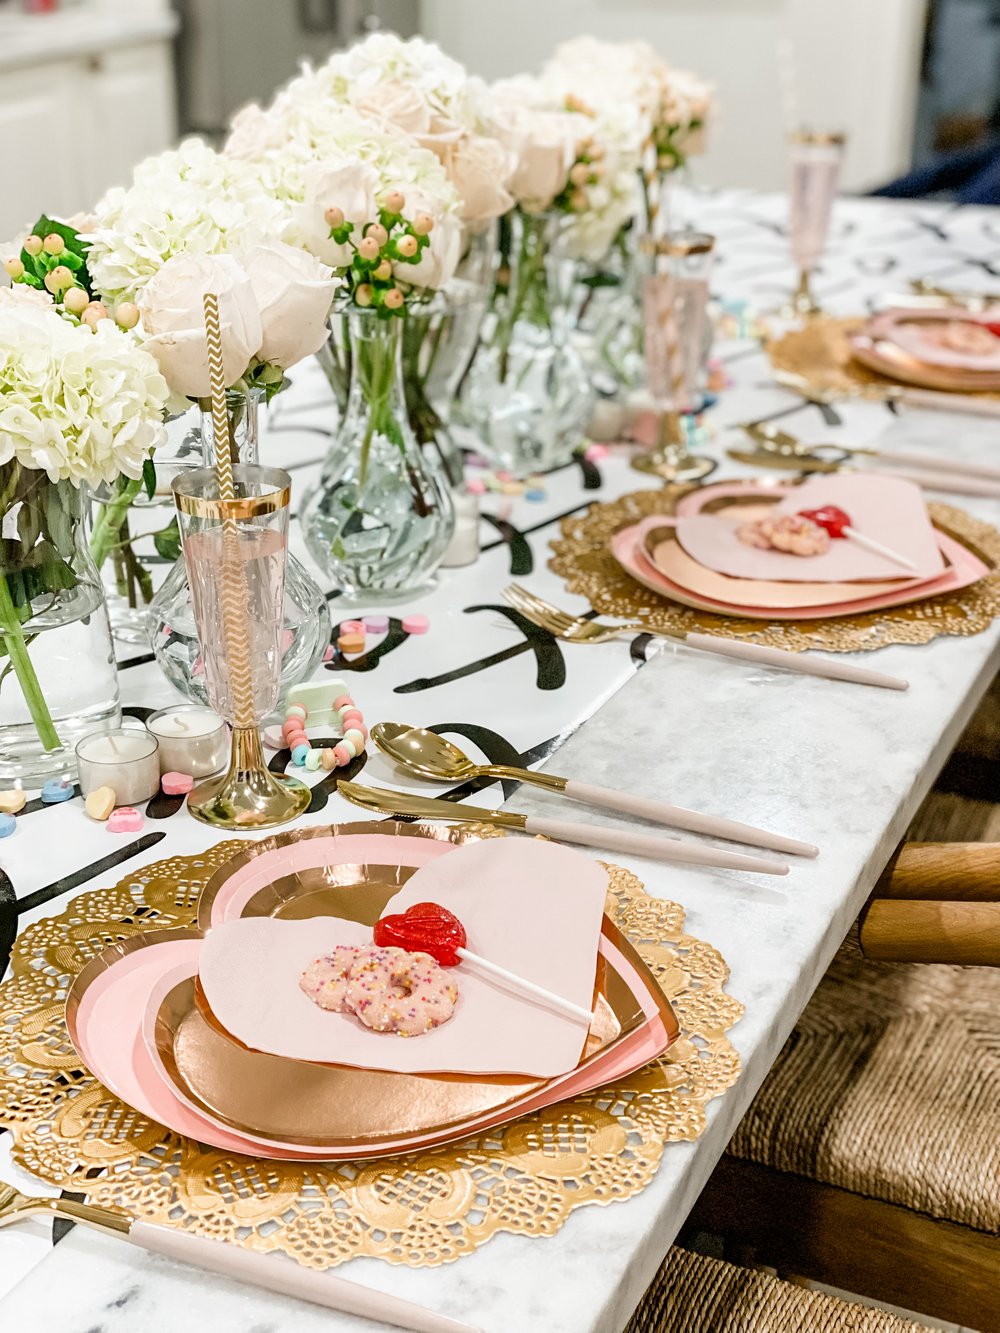 We just ate at the counter to keep this Valentine's Day Tablescape casual - yet still so lovely!